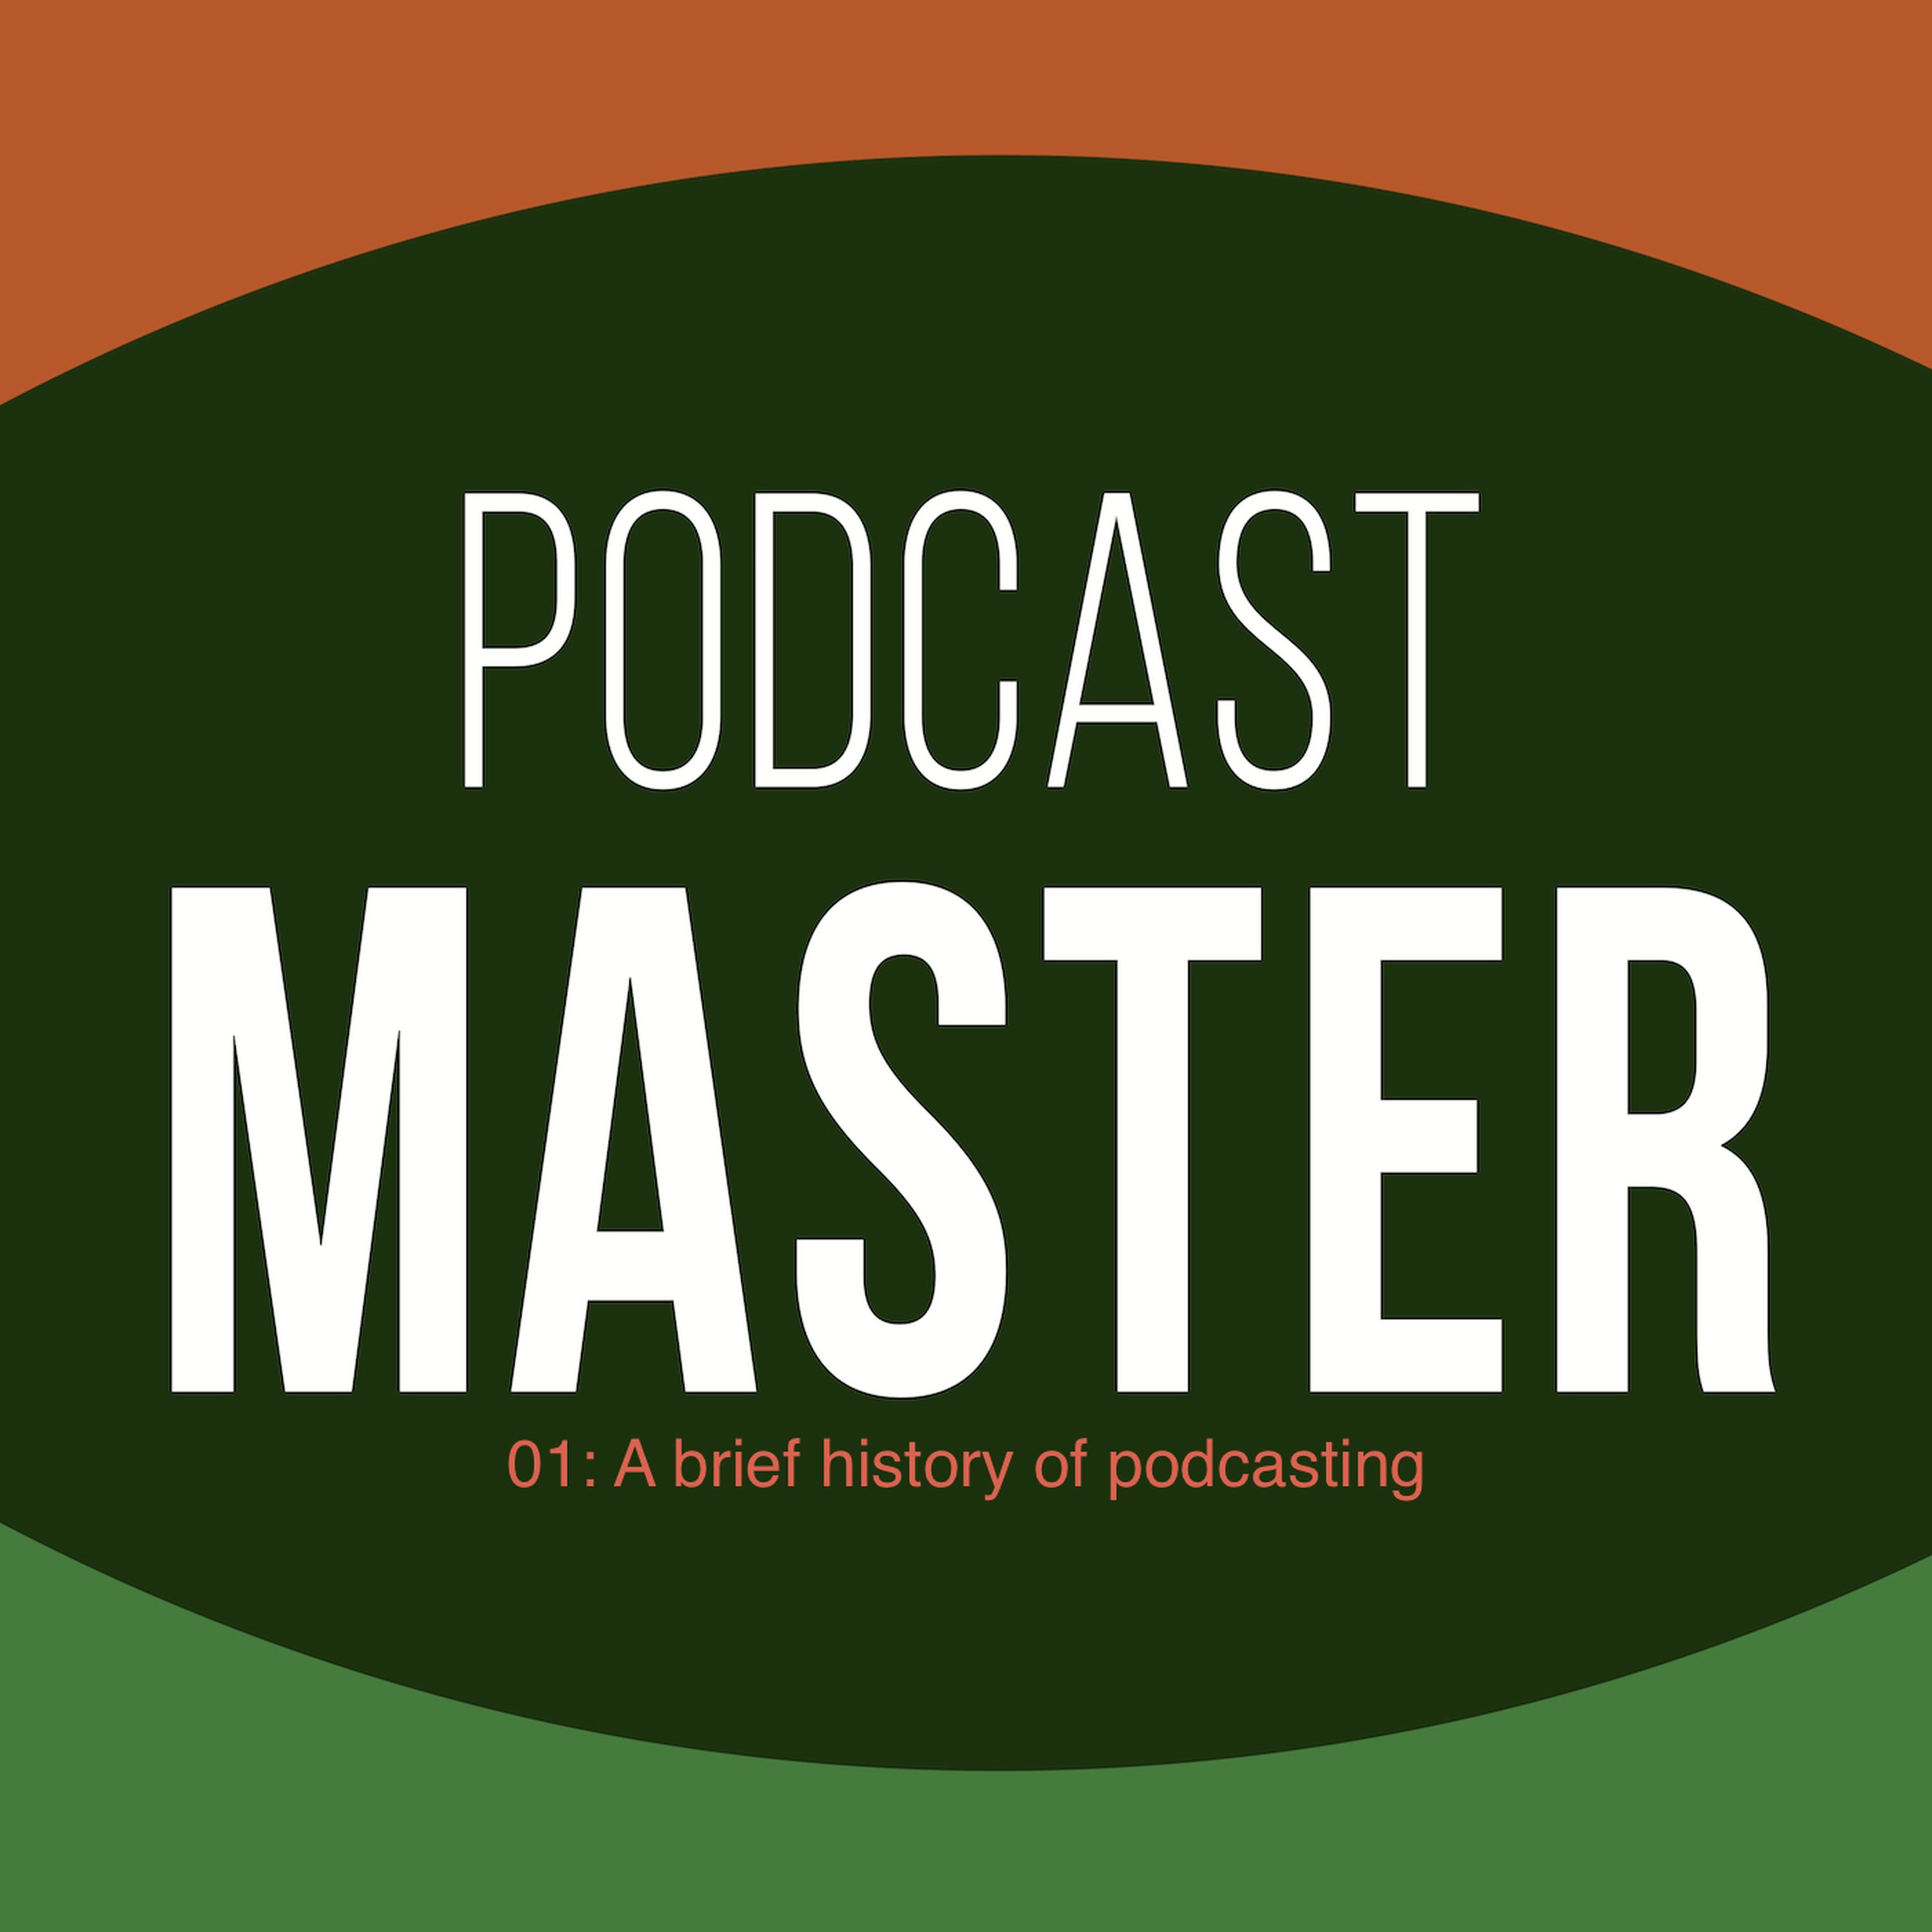 PM 01: A brief history of podcasting